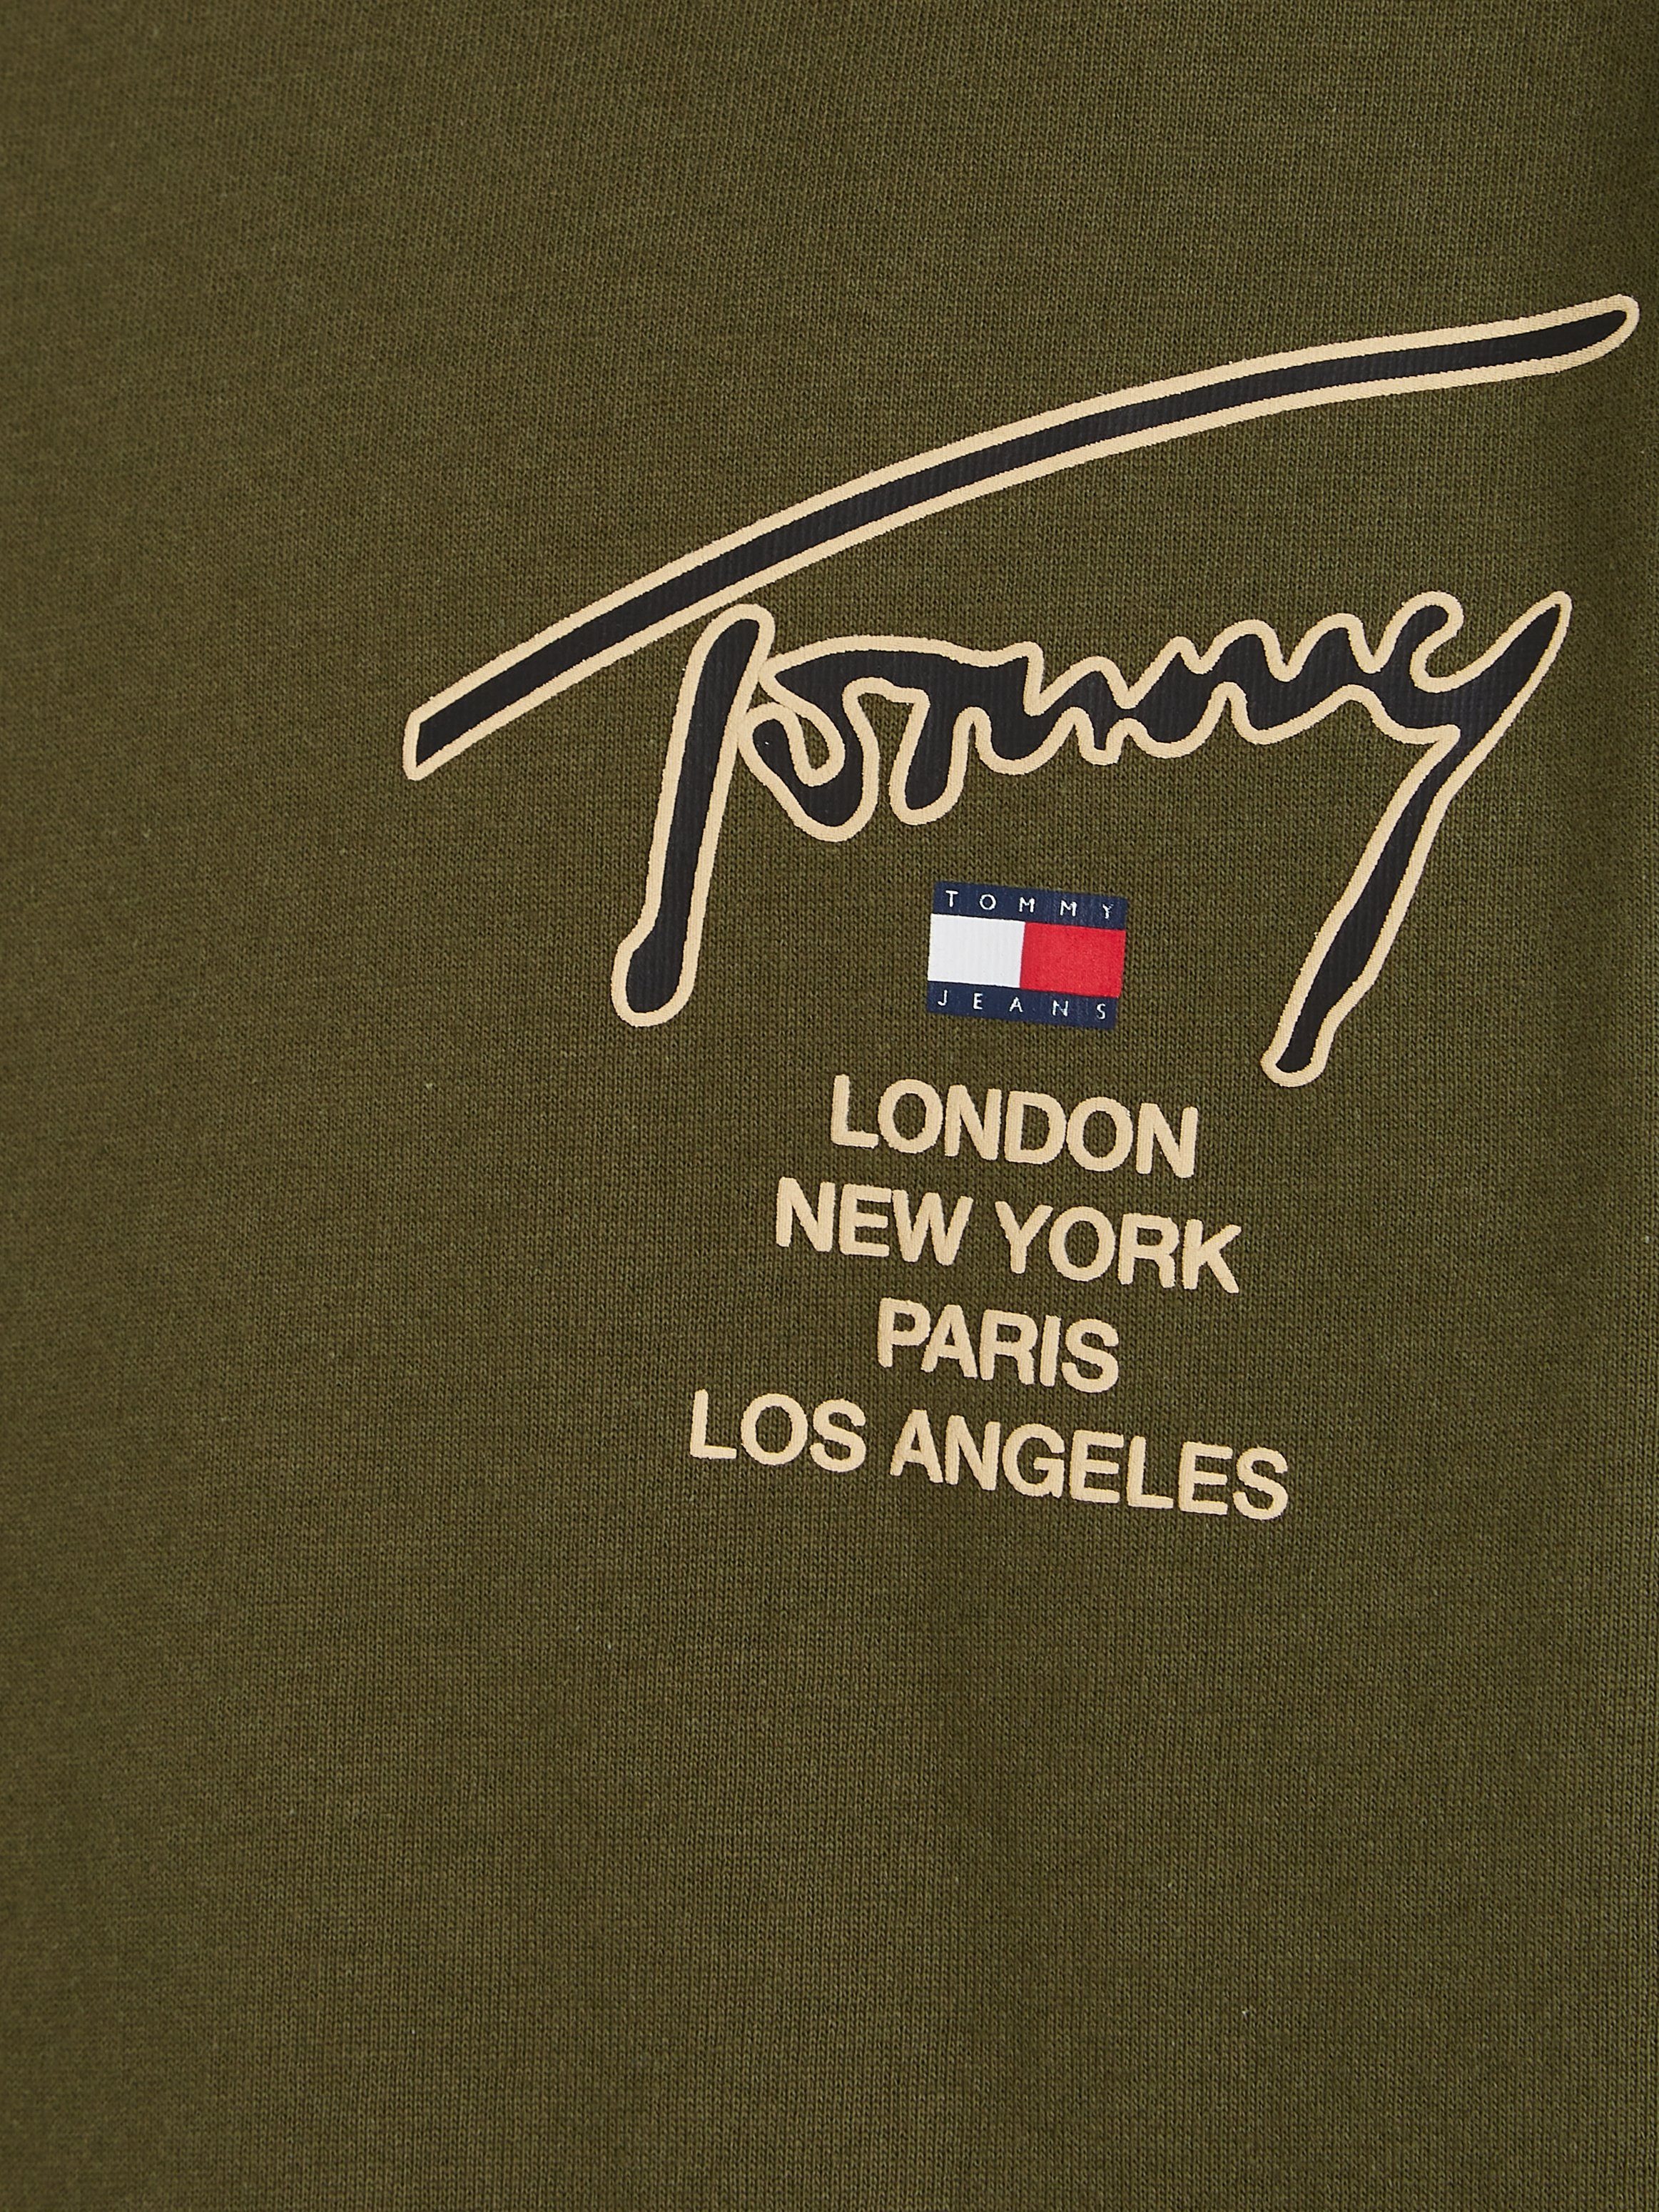 Drab T-Shirt Olive TJM GOLD BACK Jeans CLSC Tommy Green SIGNATURE TEE